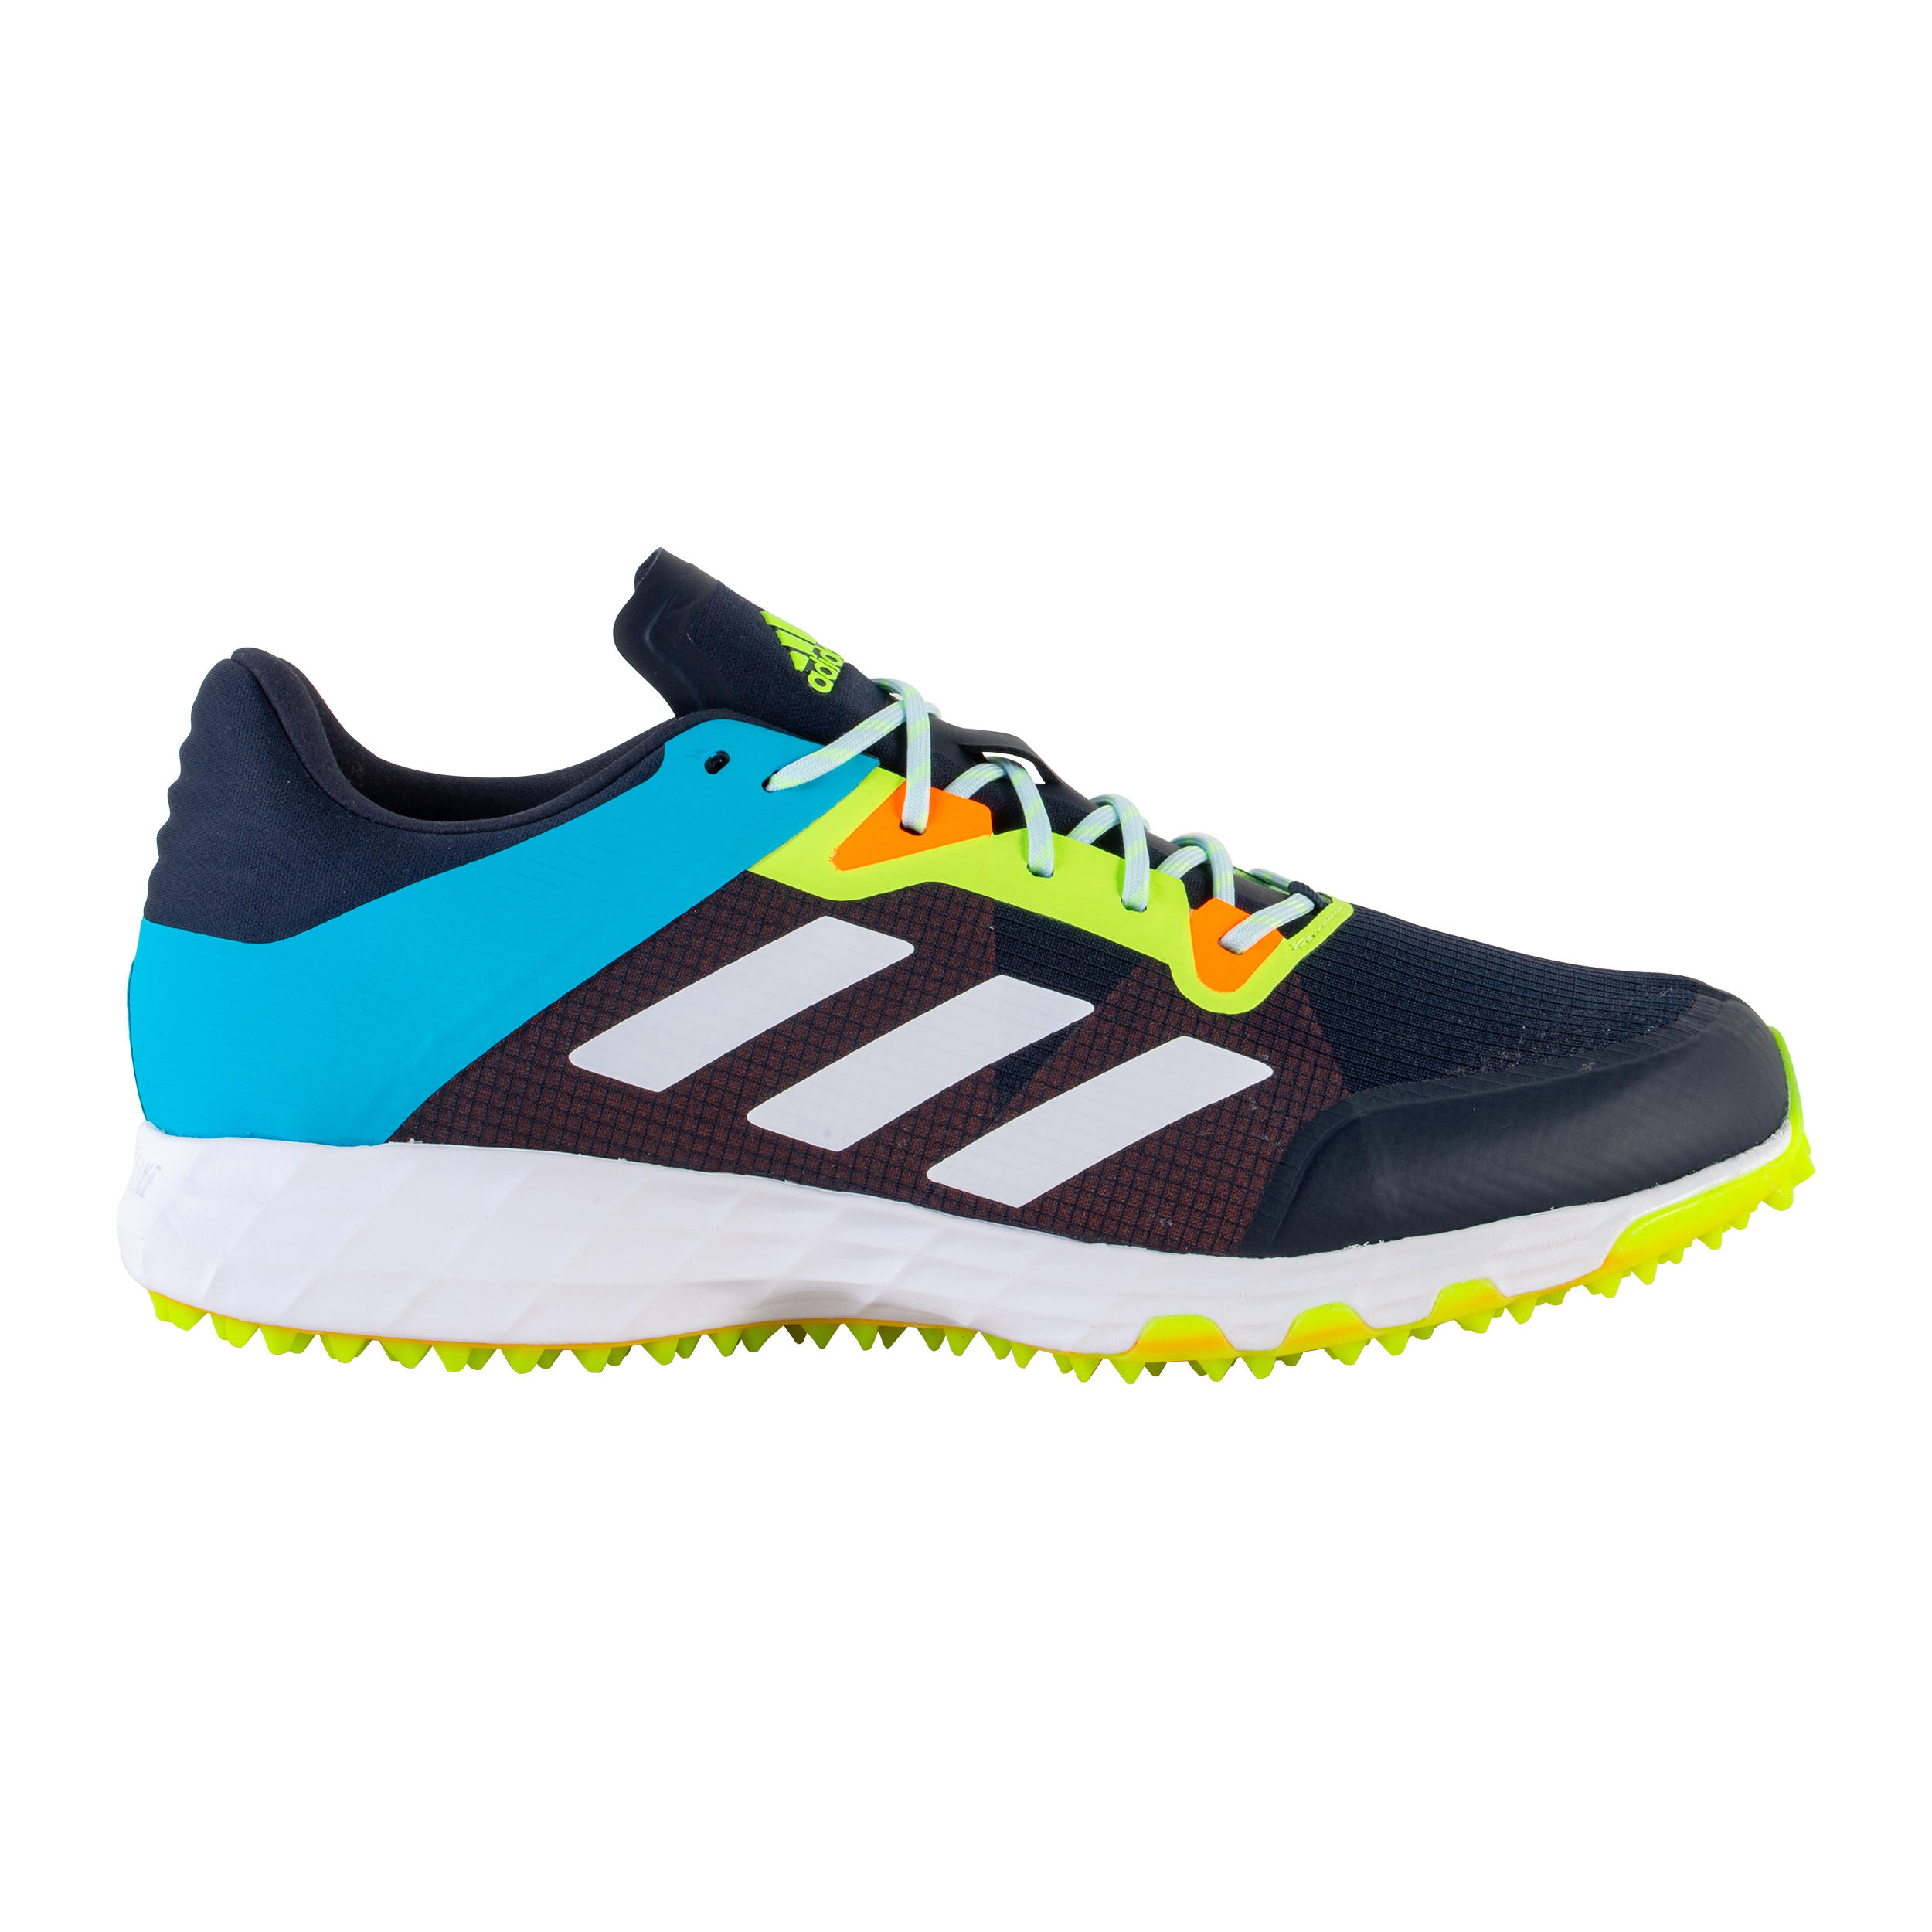 Adult High-Intensity Field Hockey Shoes Lux 1.9S - Blue 1/7